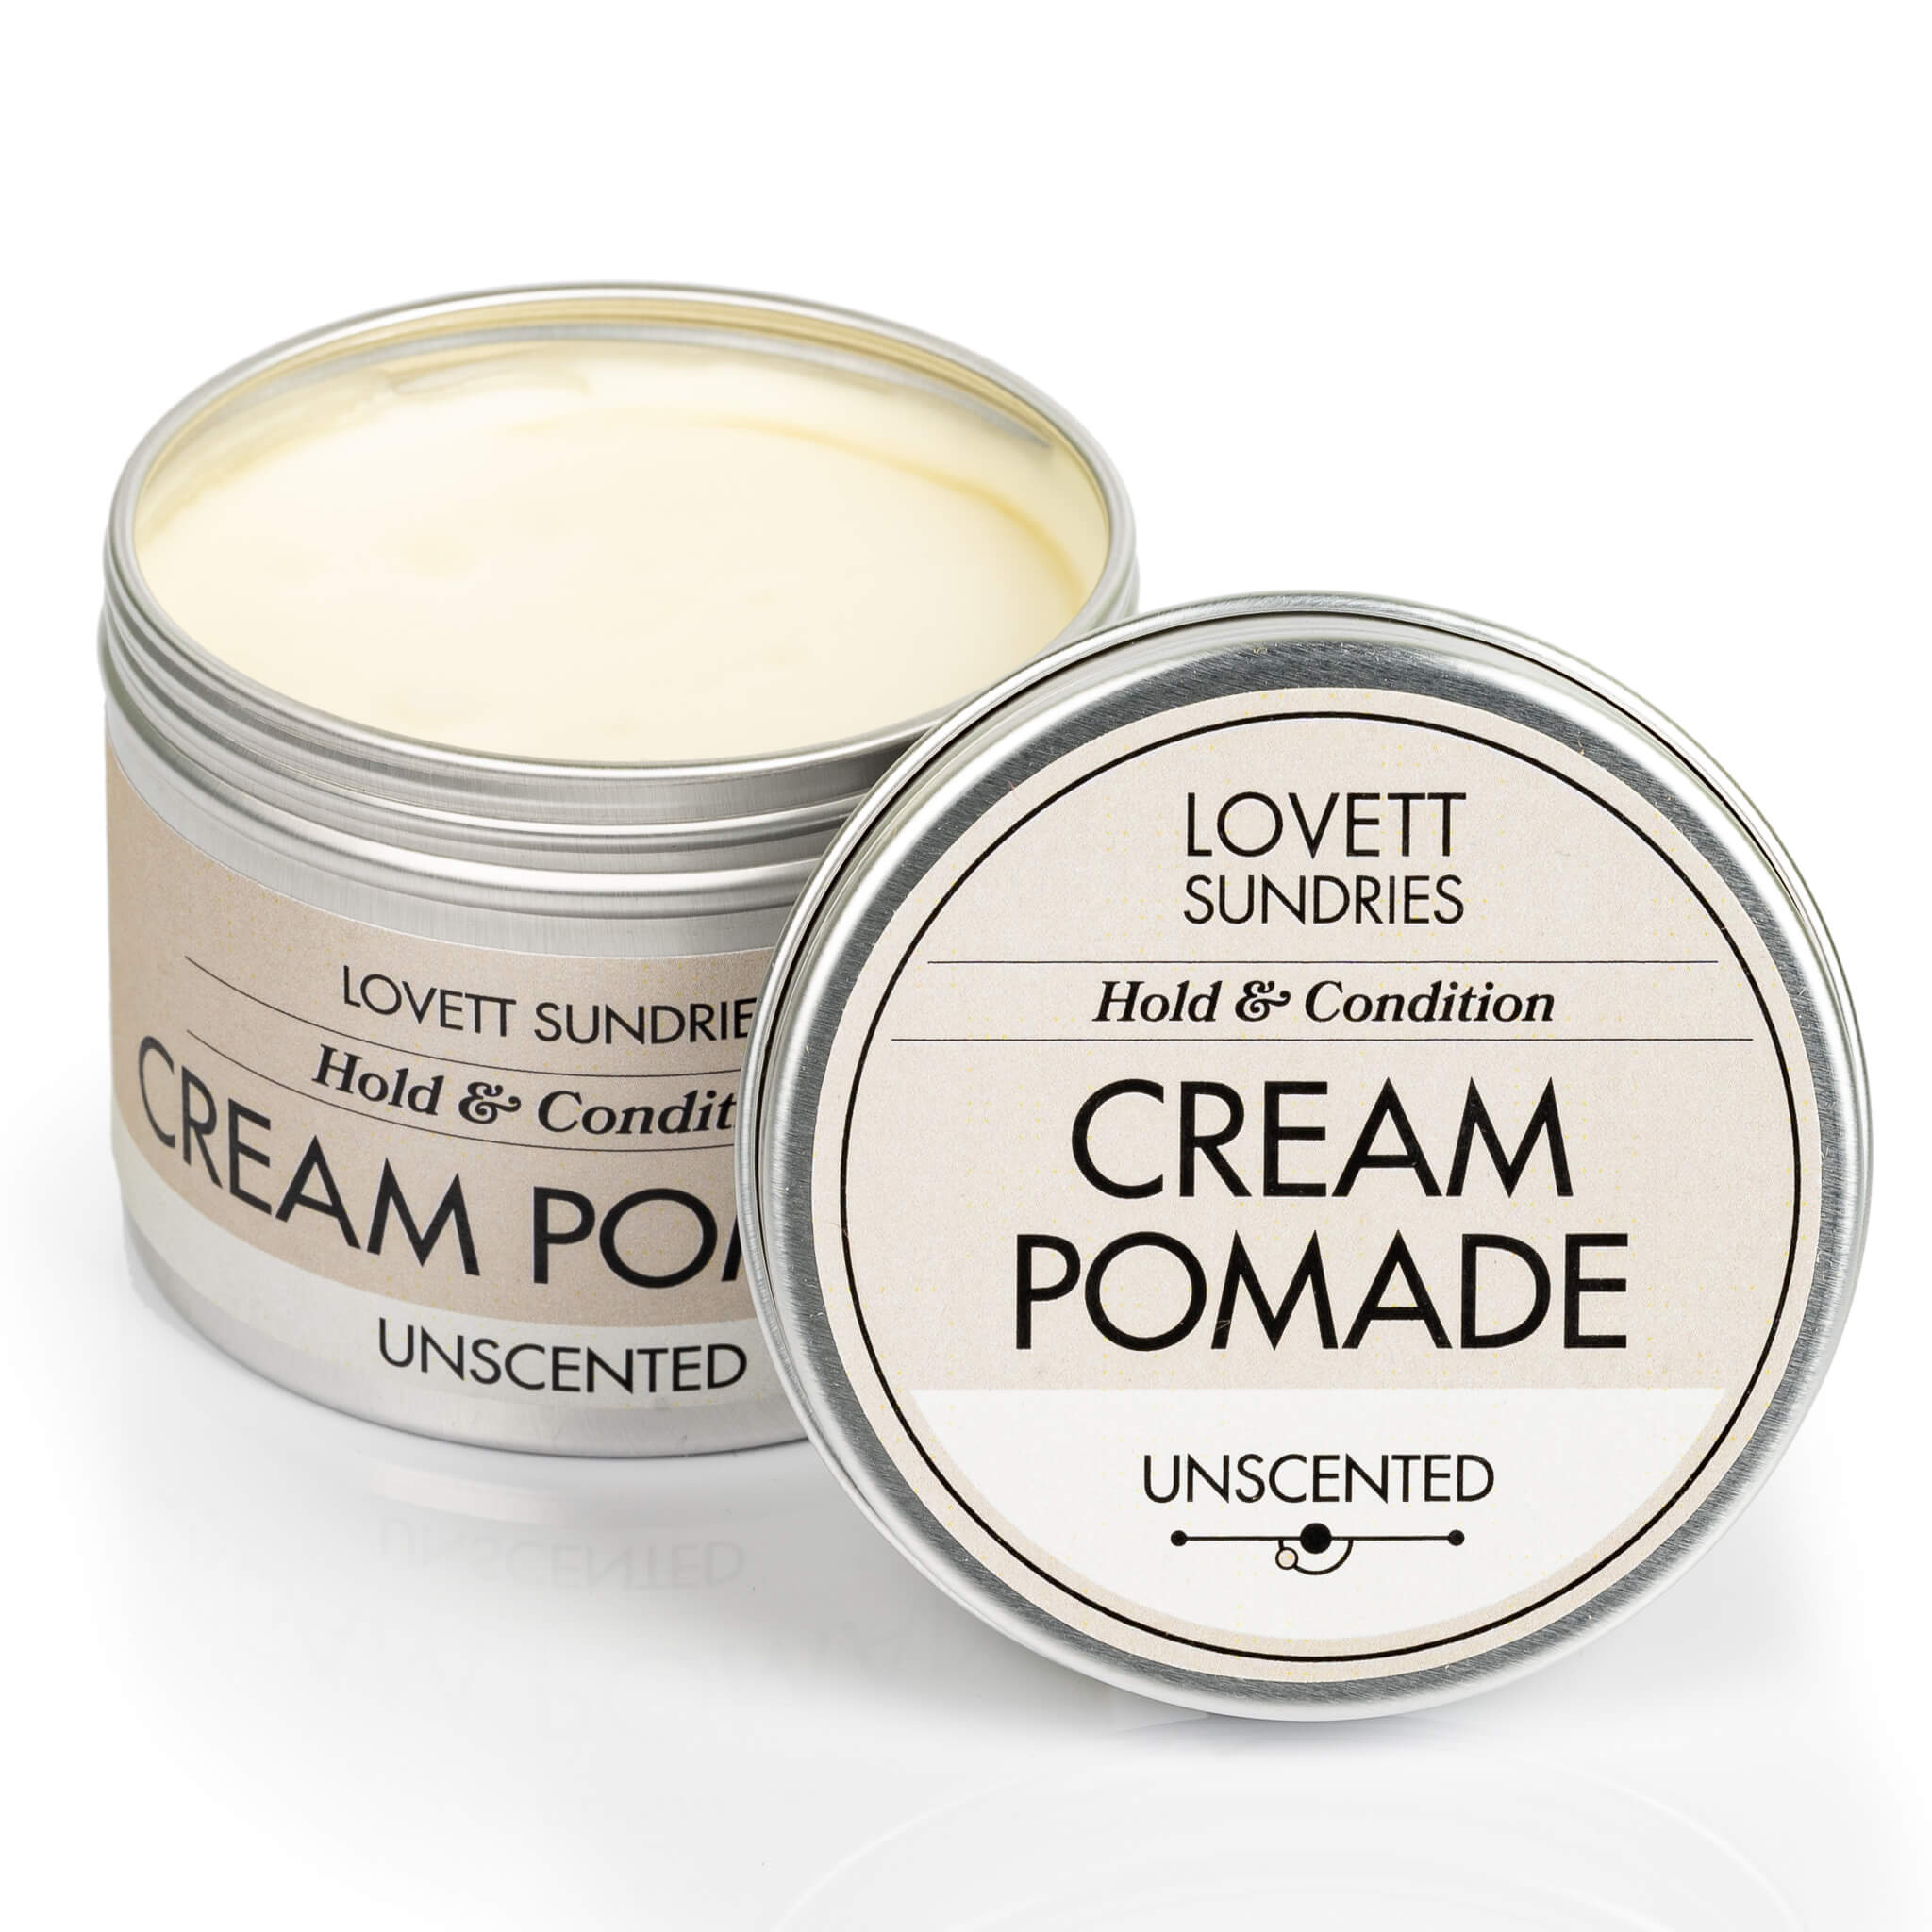 Metal tin of all natural unscented cream pomade for conditioning and styling hair. 